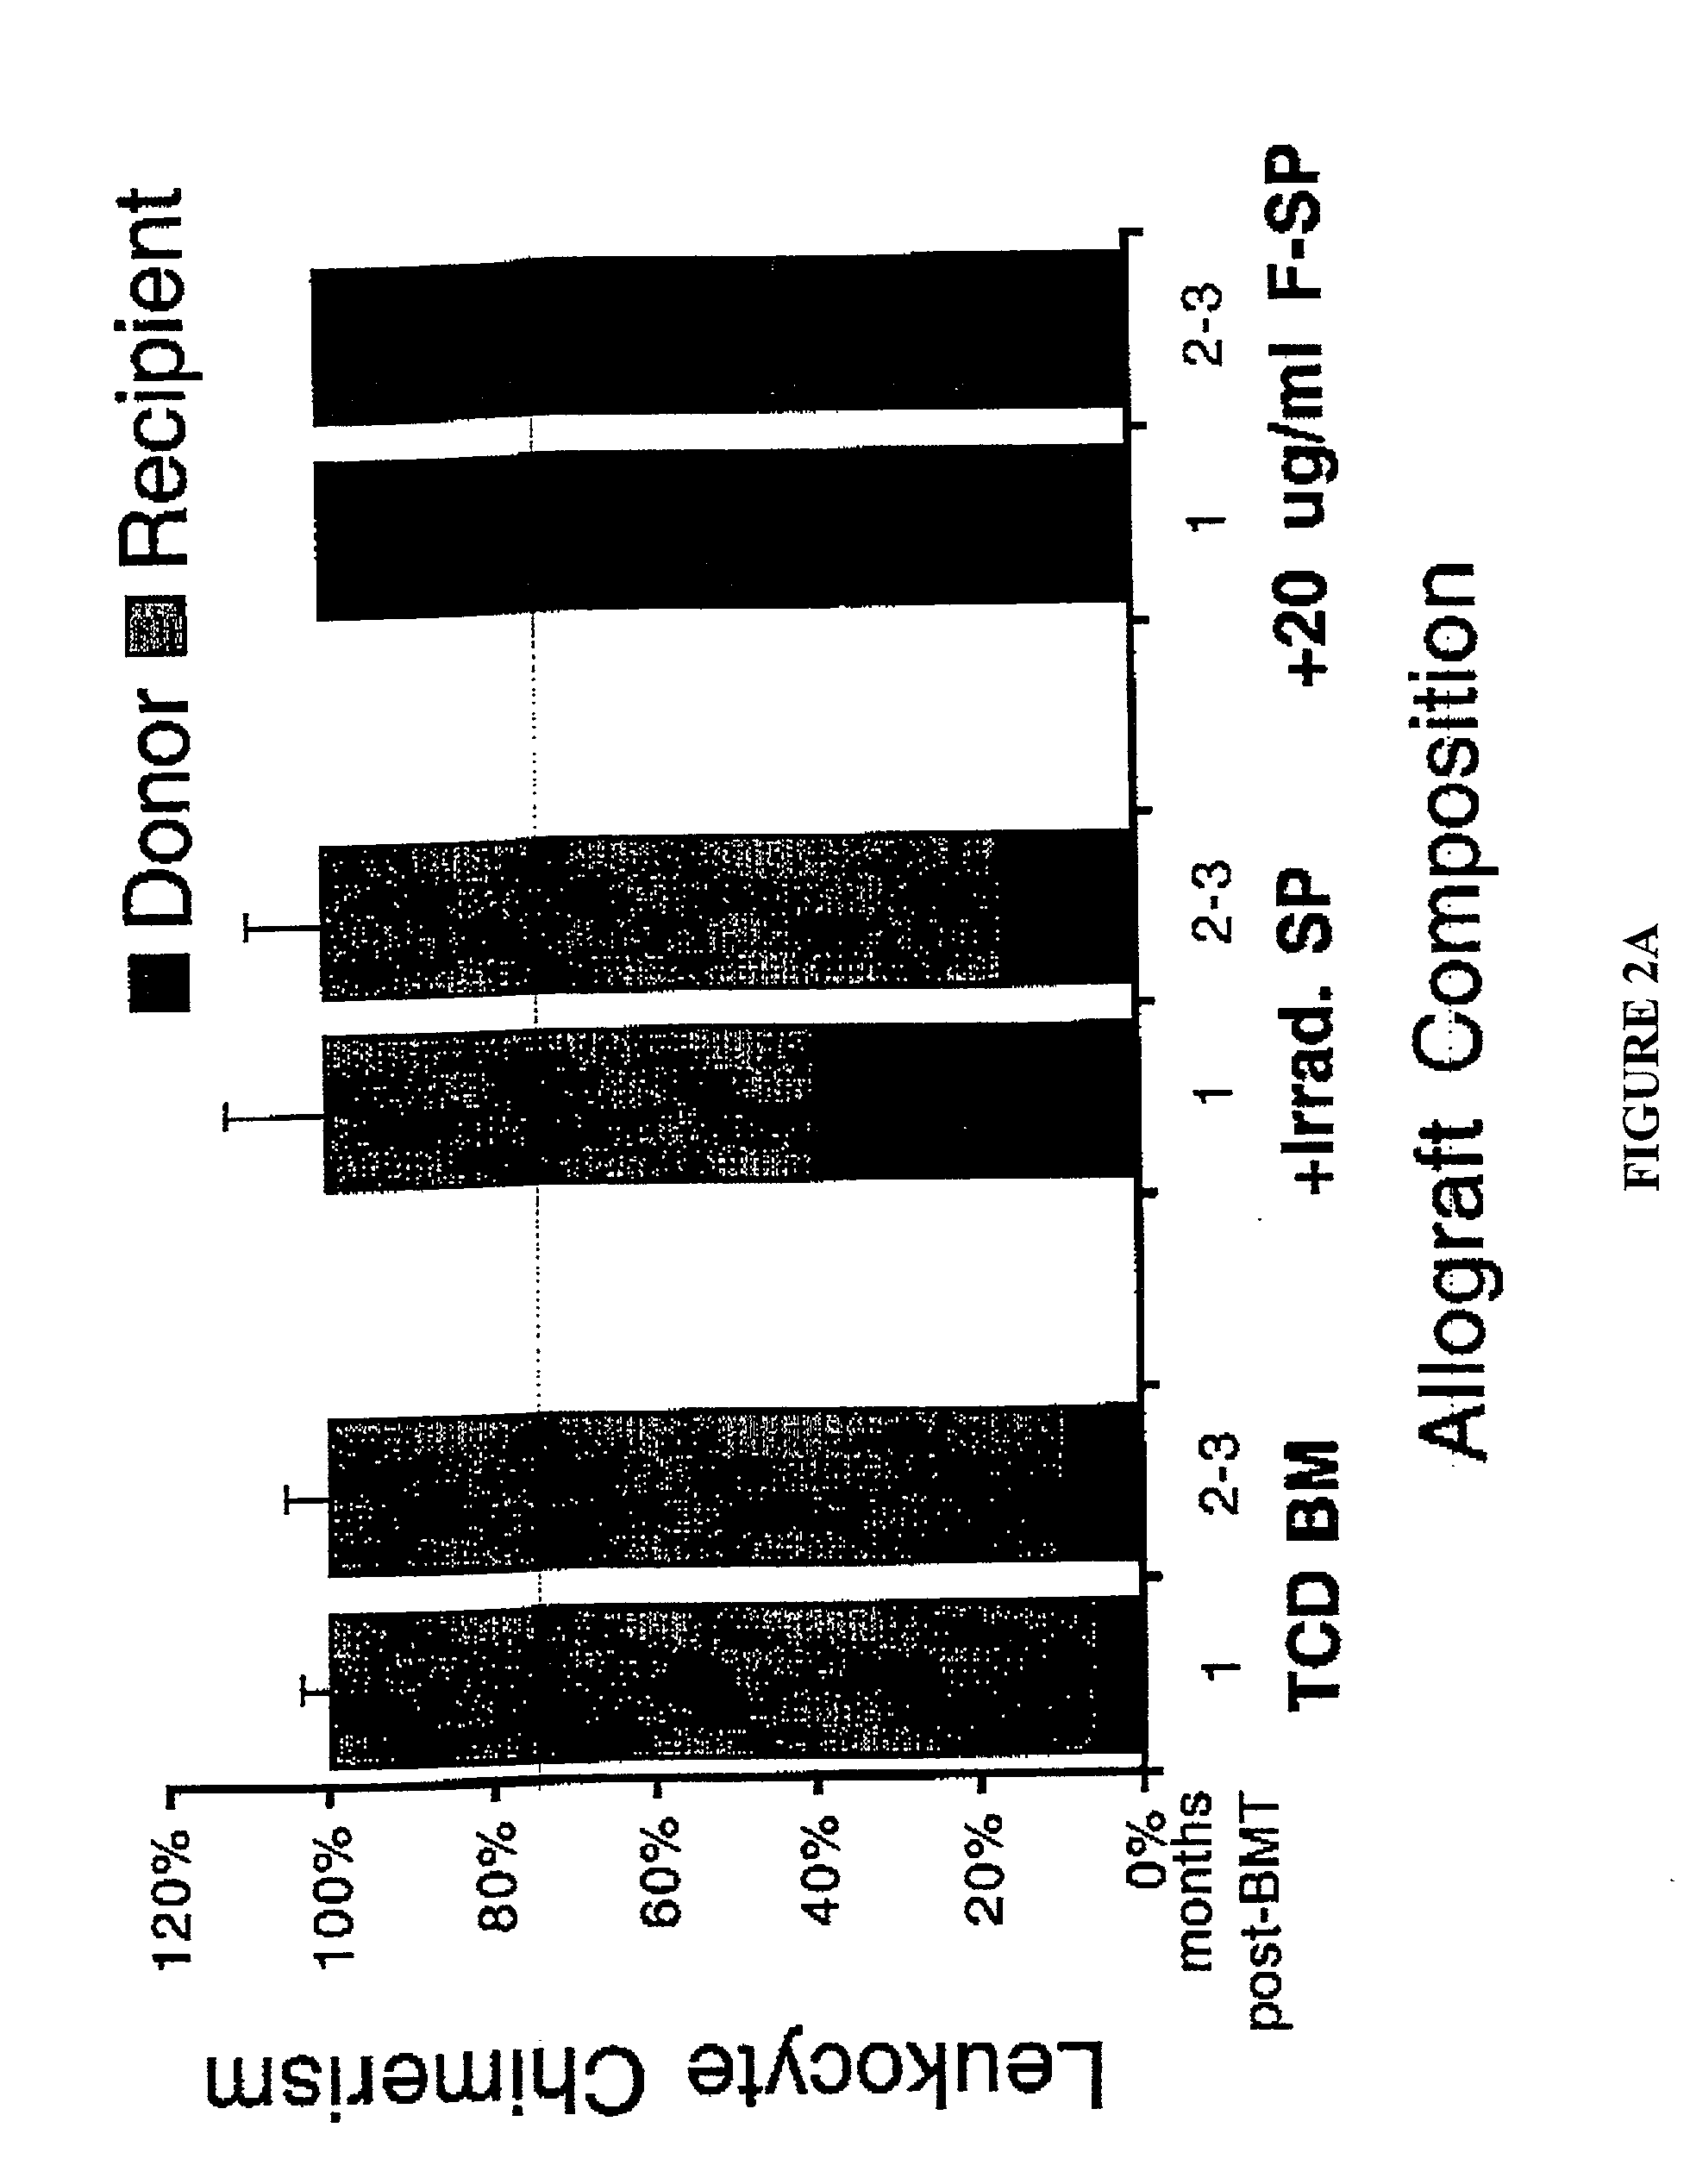 Method of transplantation using chemotherapy-treated allogeneic cells that enhance immune responses without graft versus host disease